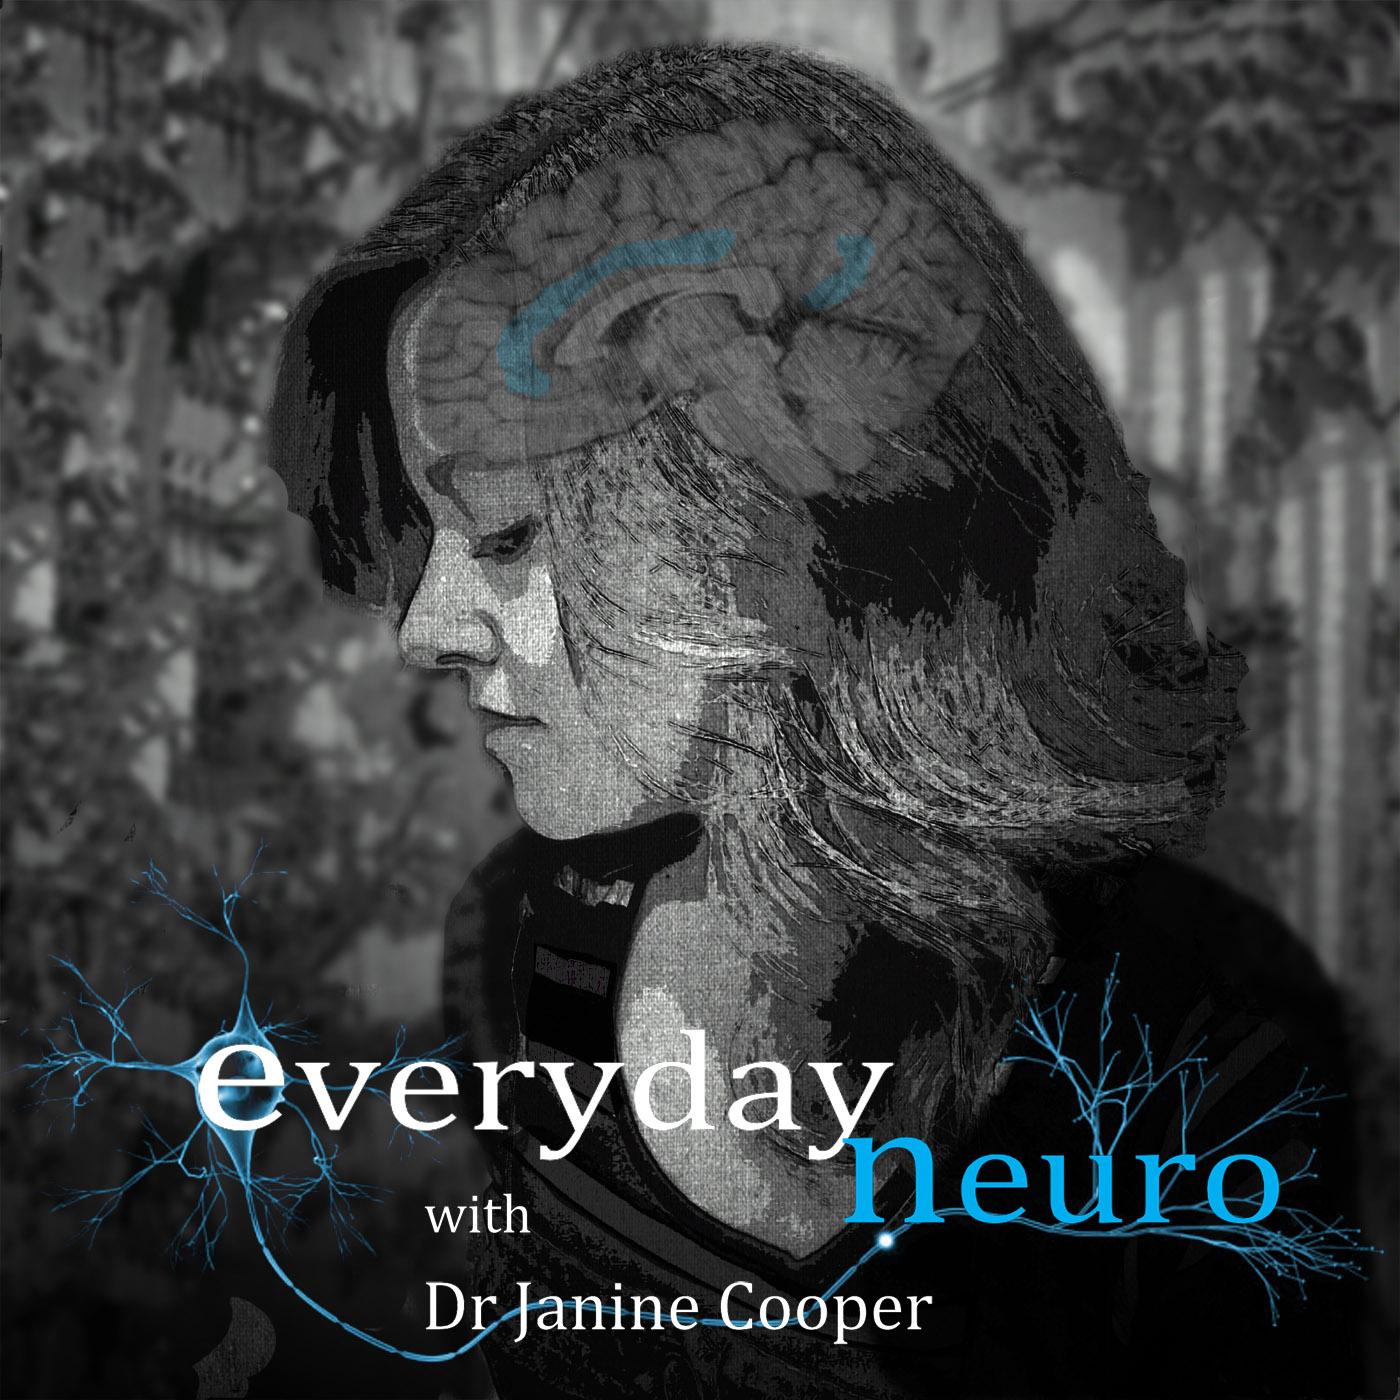 Everyday Neuro 005: How to Become an Expert - A Collaboration Between Attention, Working Memory and Executive Function